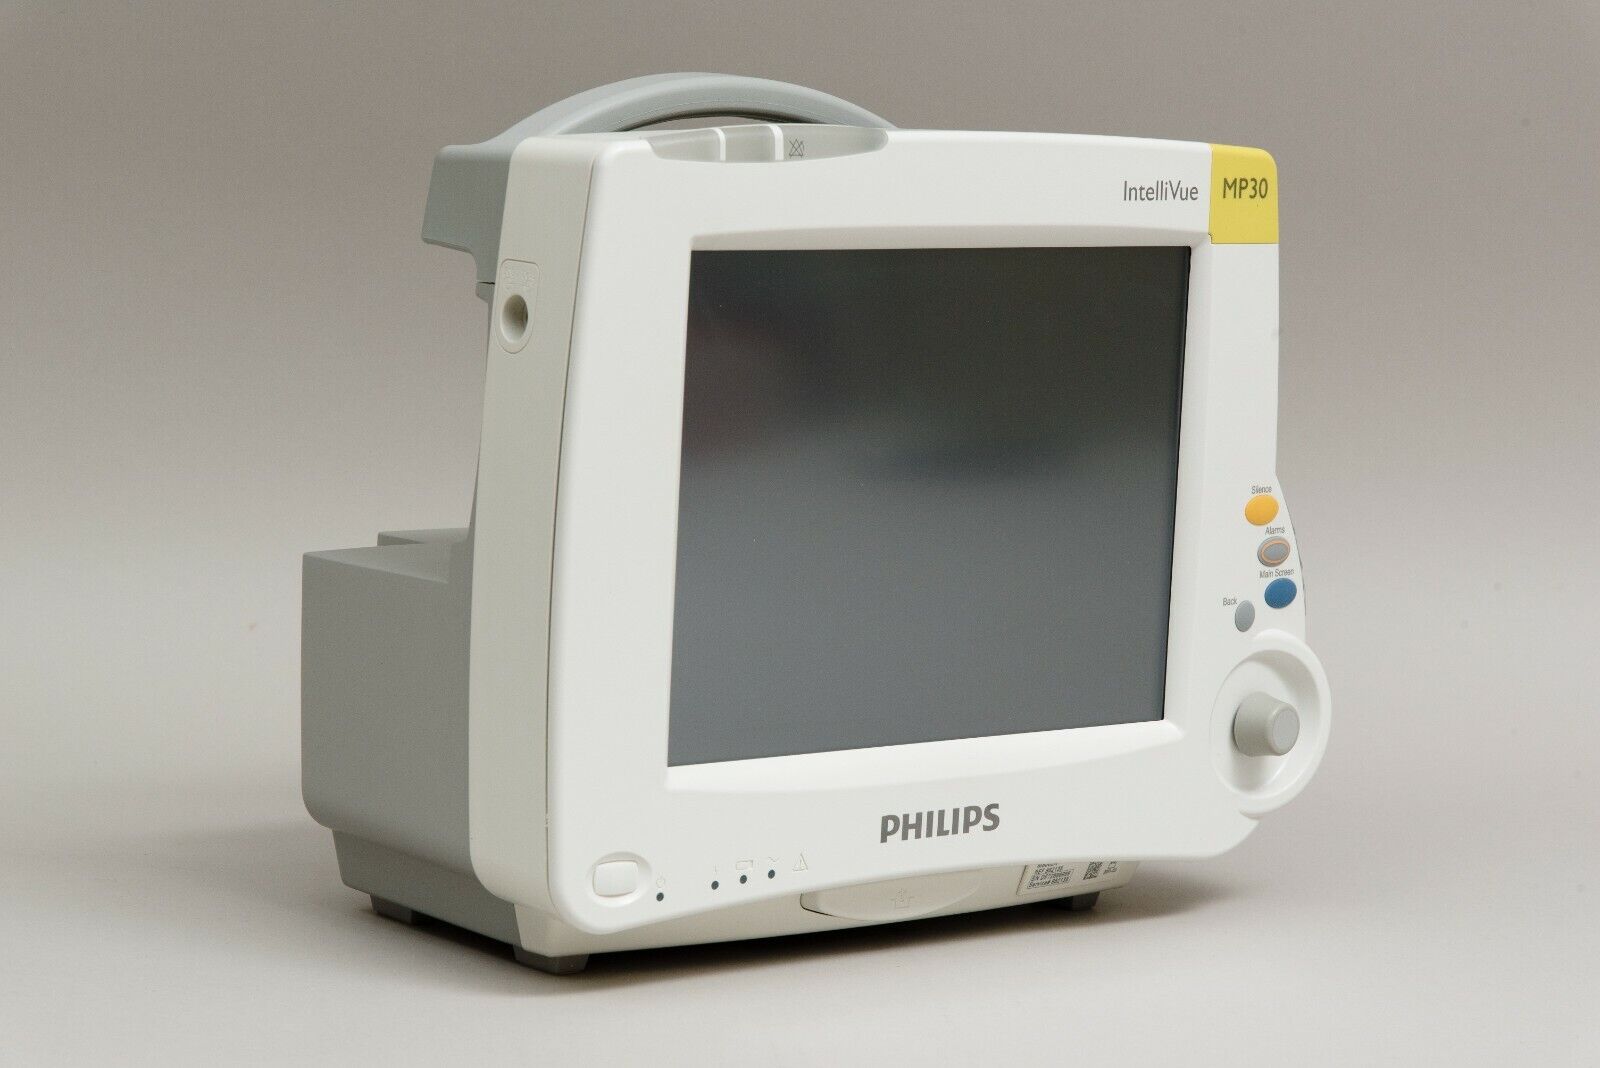 Lot of 5 Refurbished Philips IntelliVue MP30 Monitor  Available at Simon Medical Philips MP30 - фотография #6